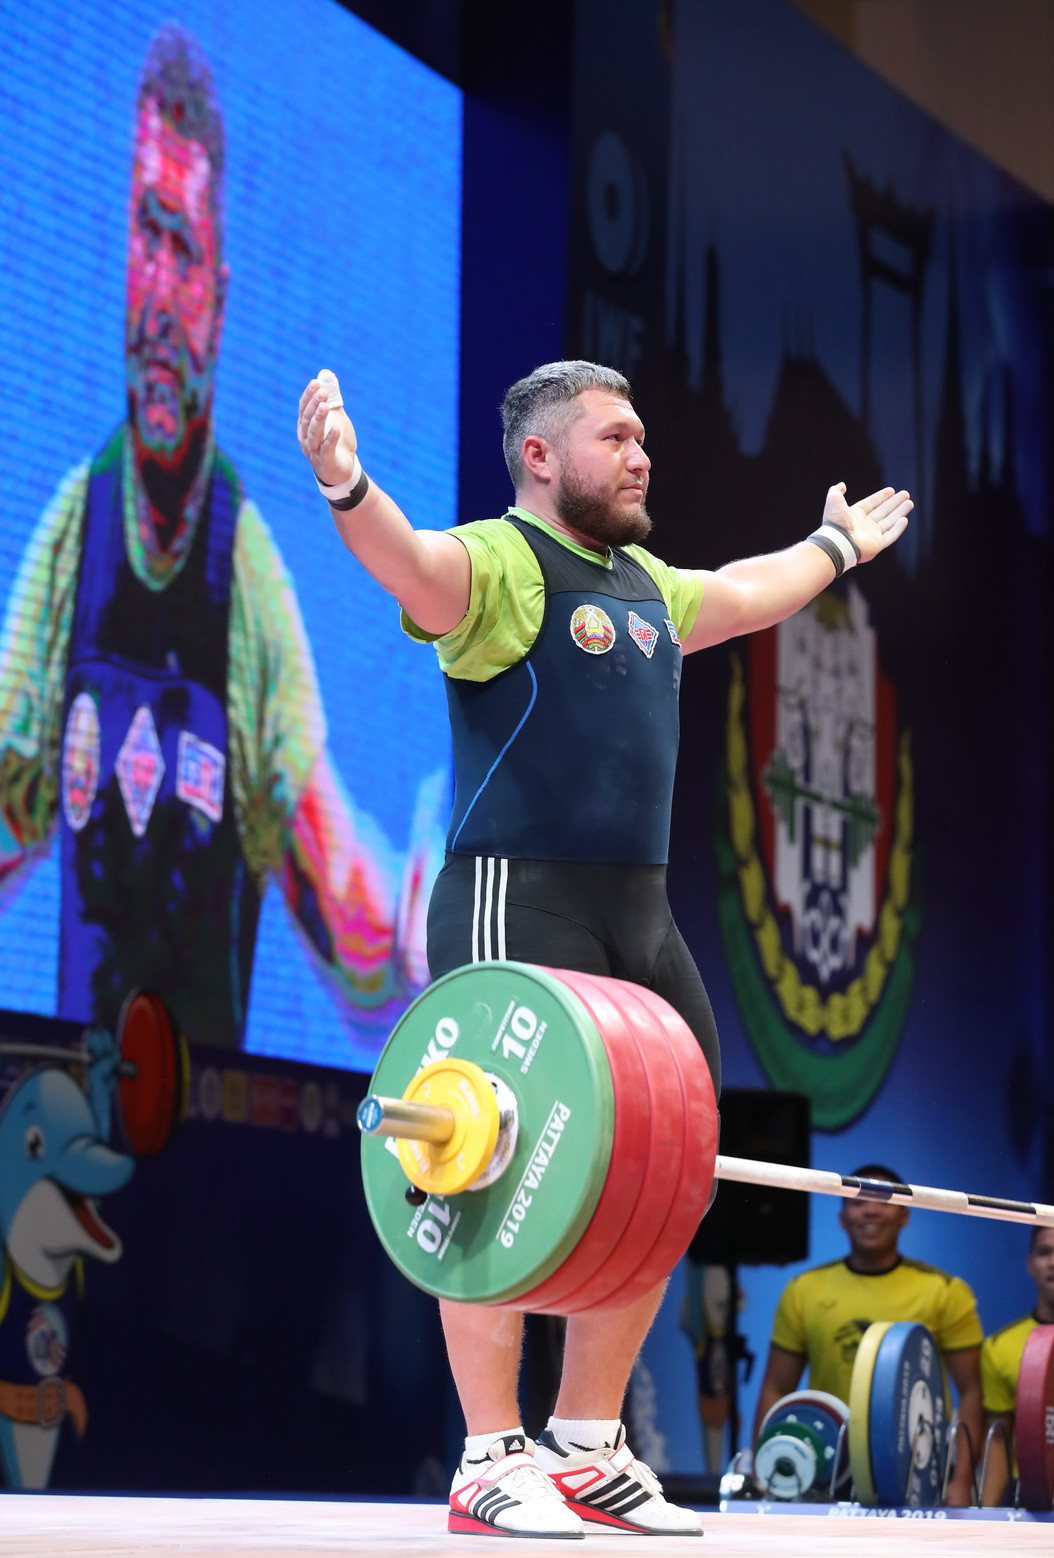 Belarus' Andrei Aramnau was the runner-up in the total ©IWF